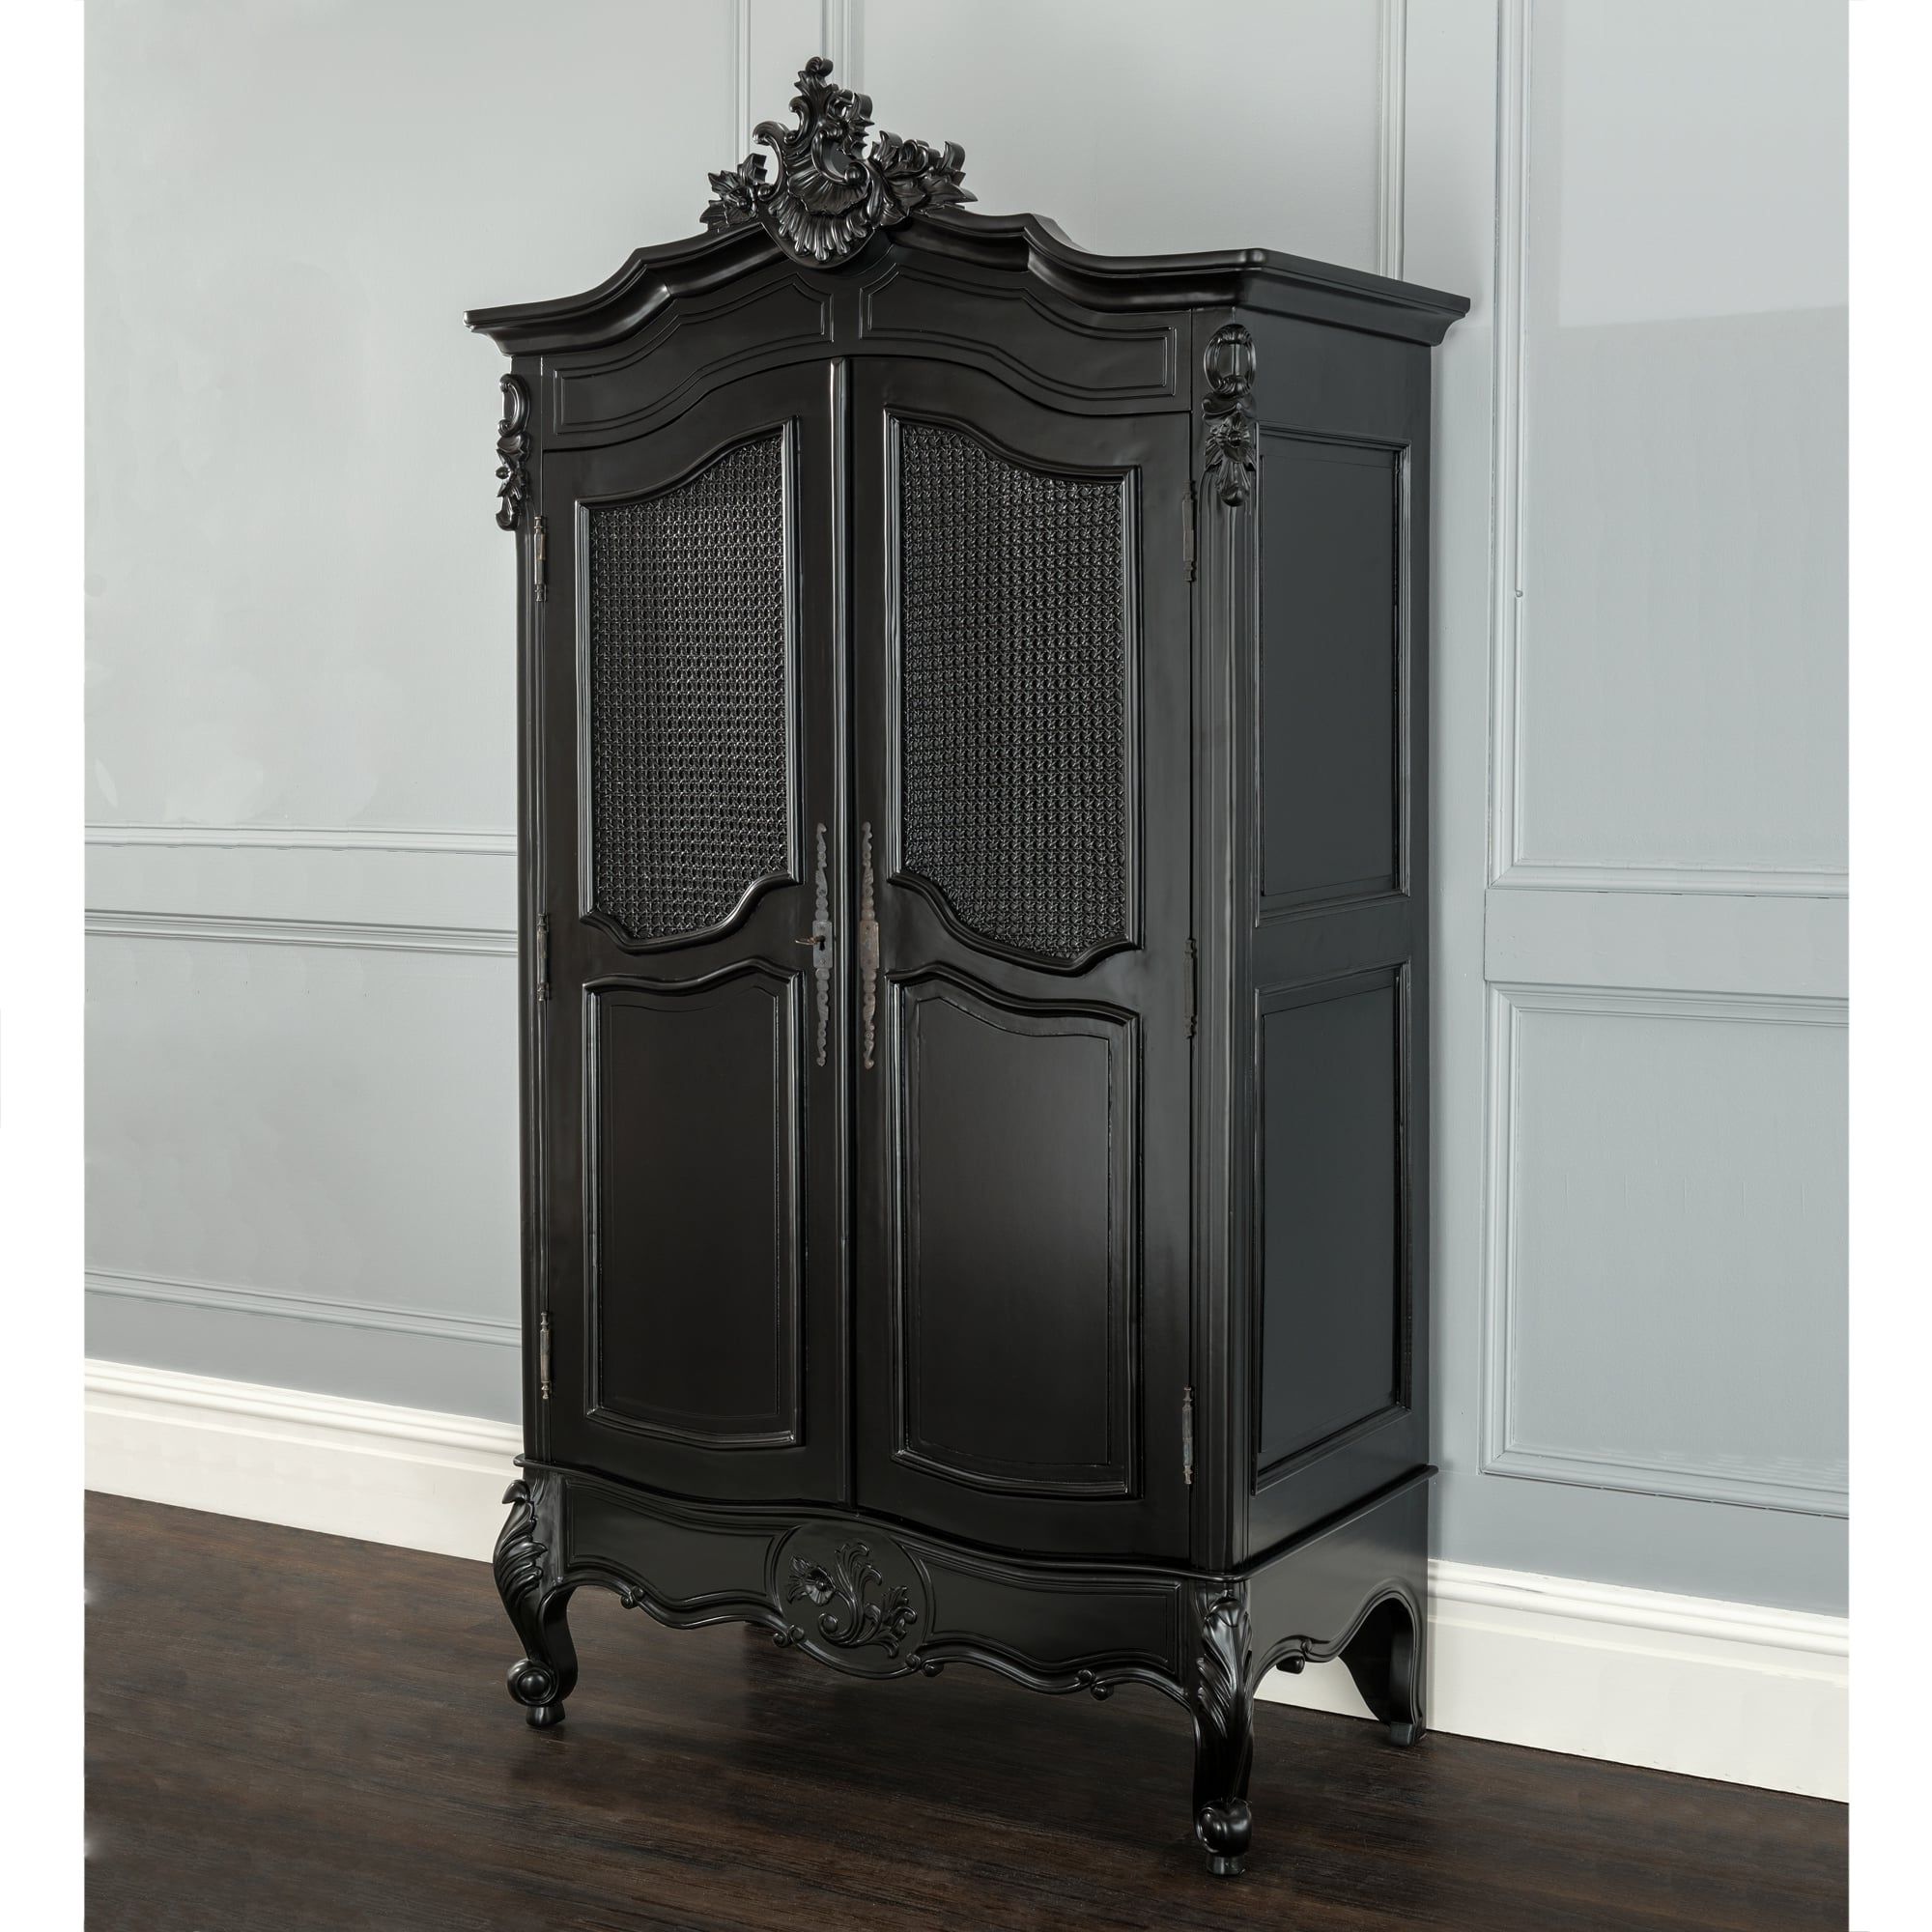 La Rochelle Antique French Wardrobe | Black Painted Furniture Within Black French Style Wardrobes (Gallery 5 of 20)